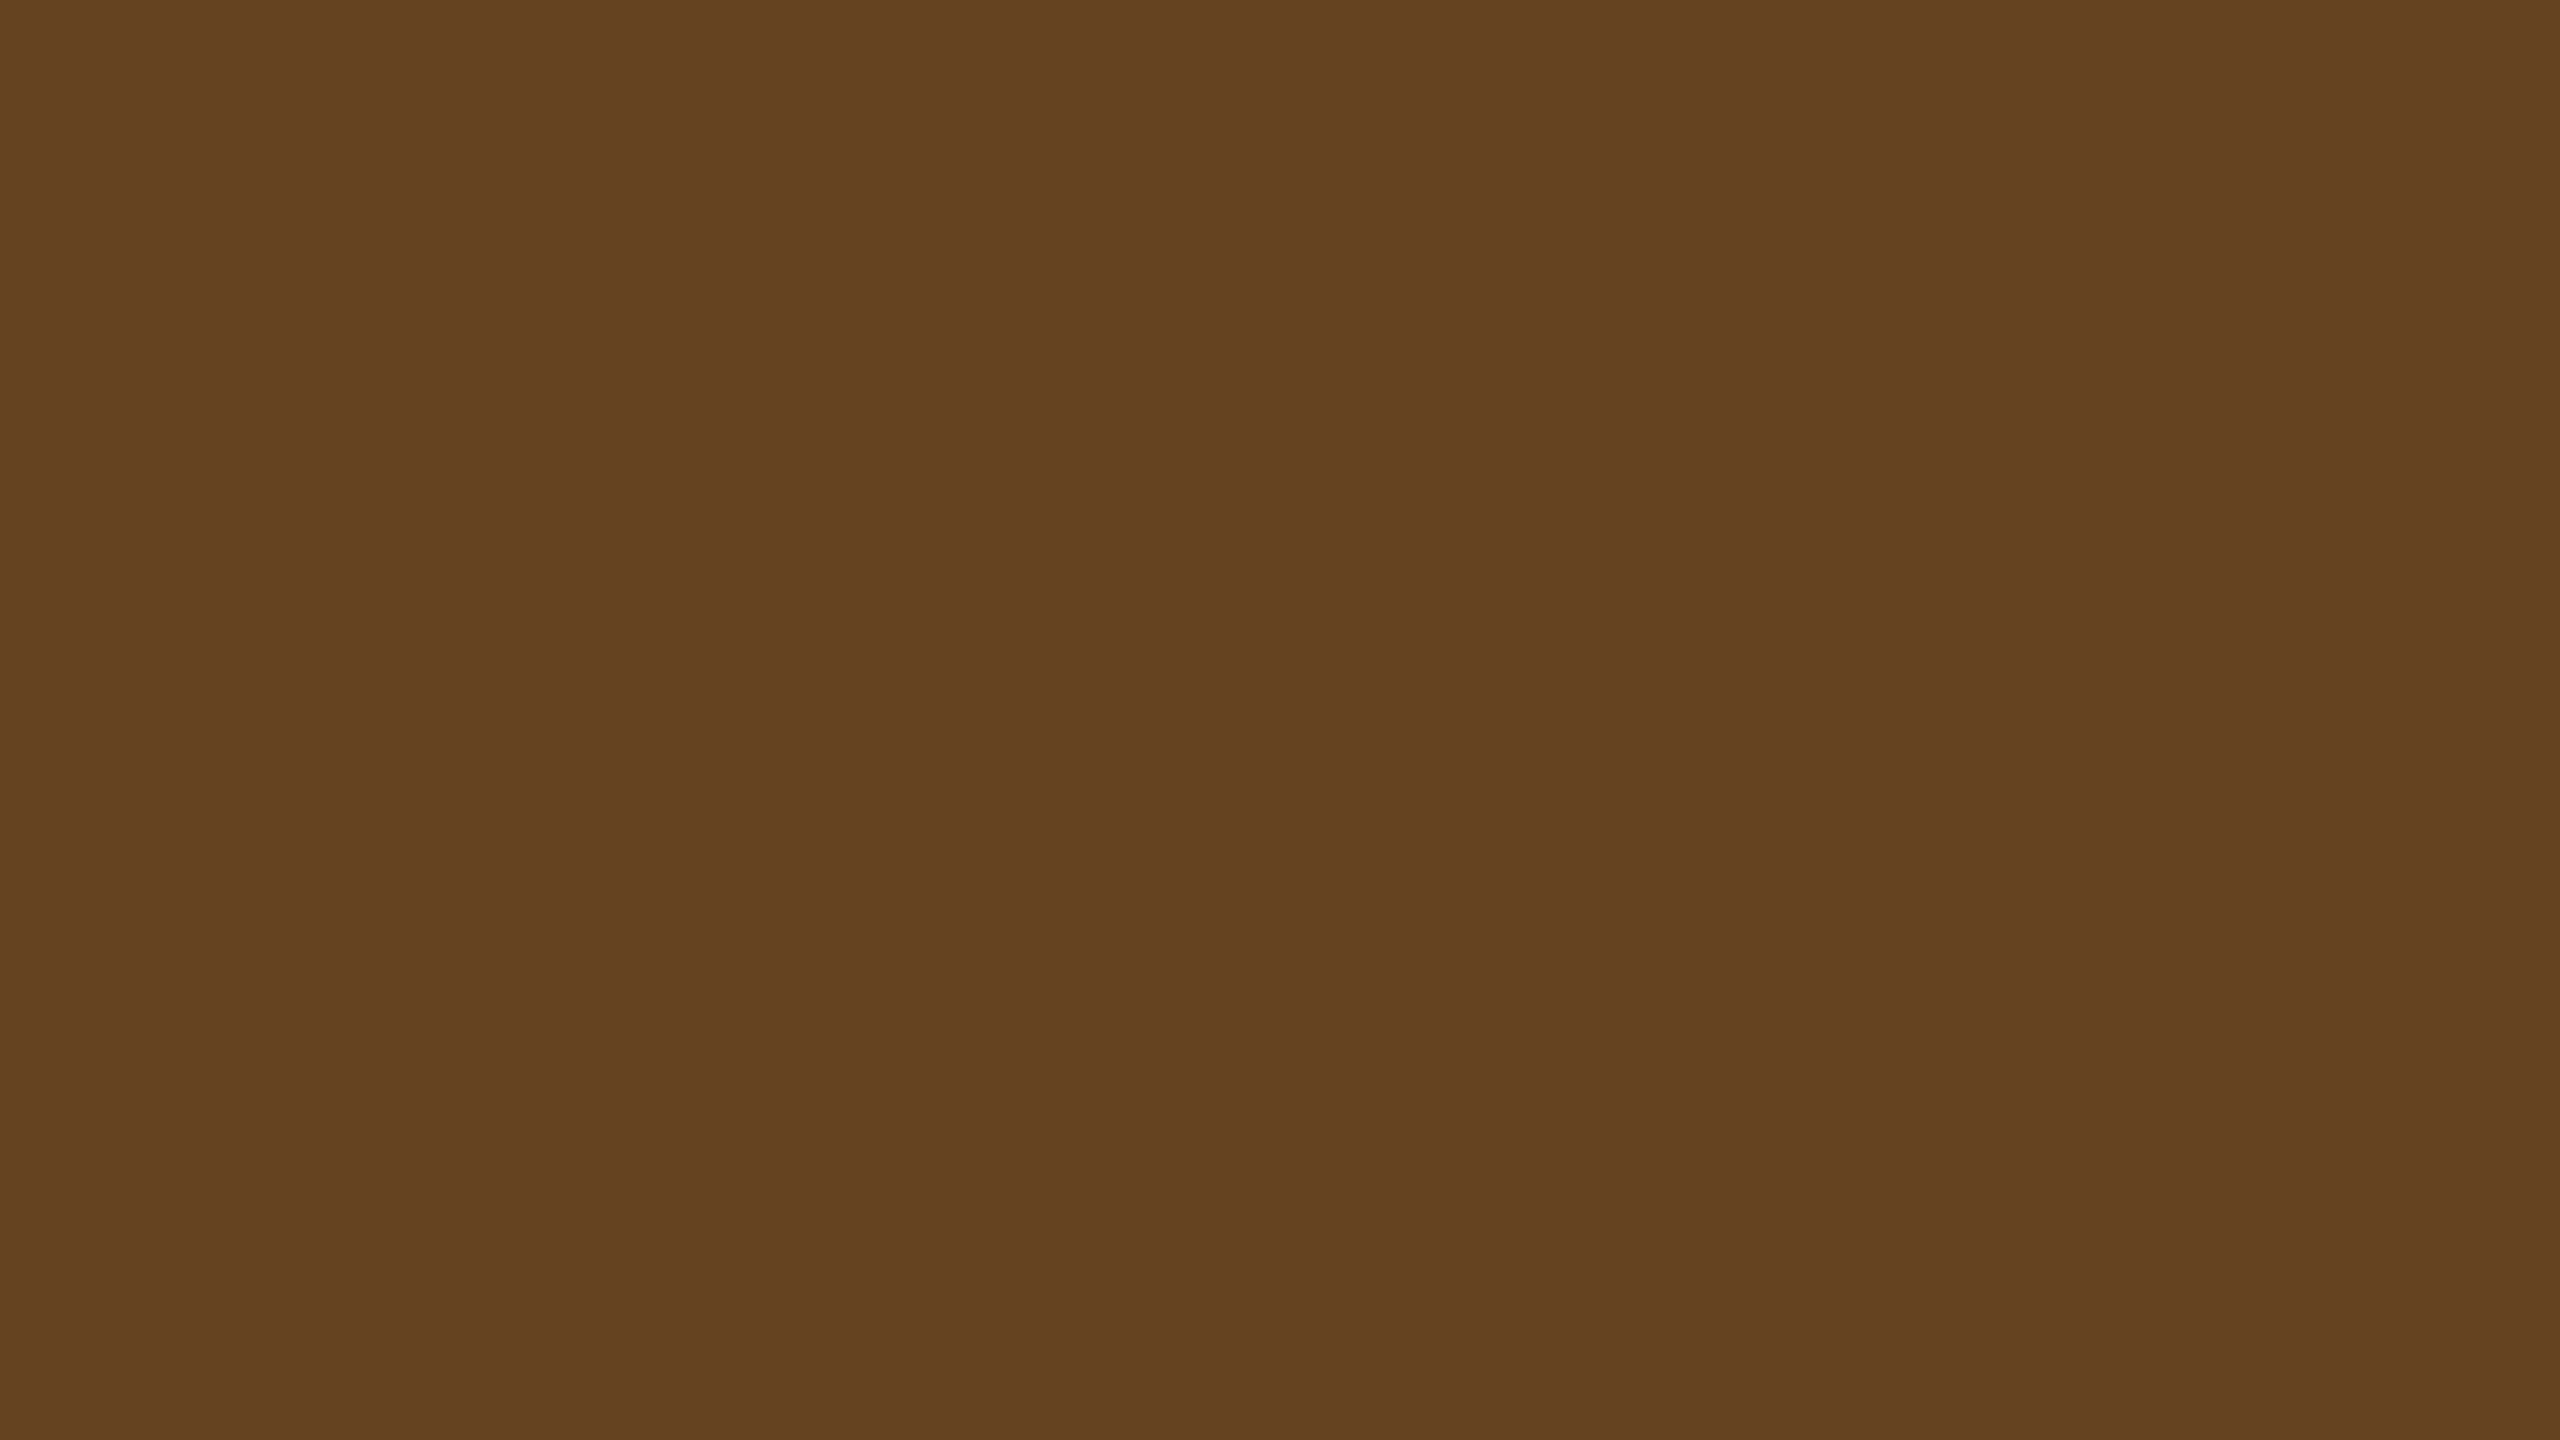 background color solid brown otter images 2560x1440